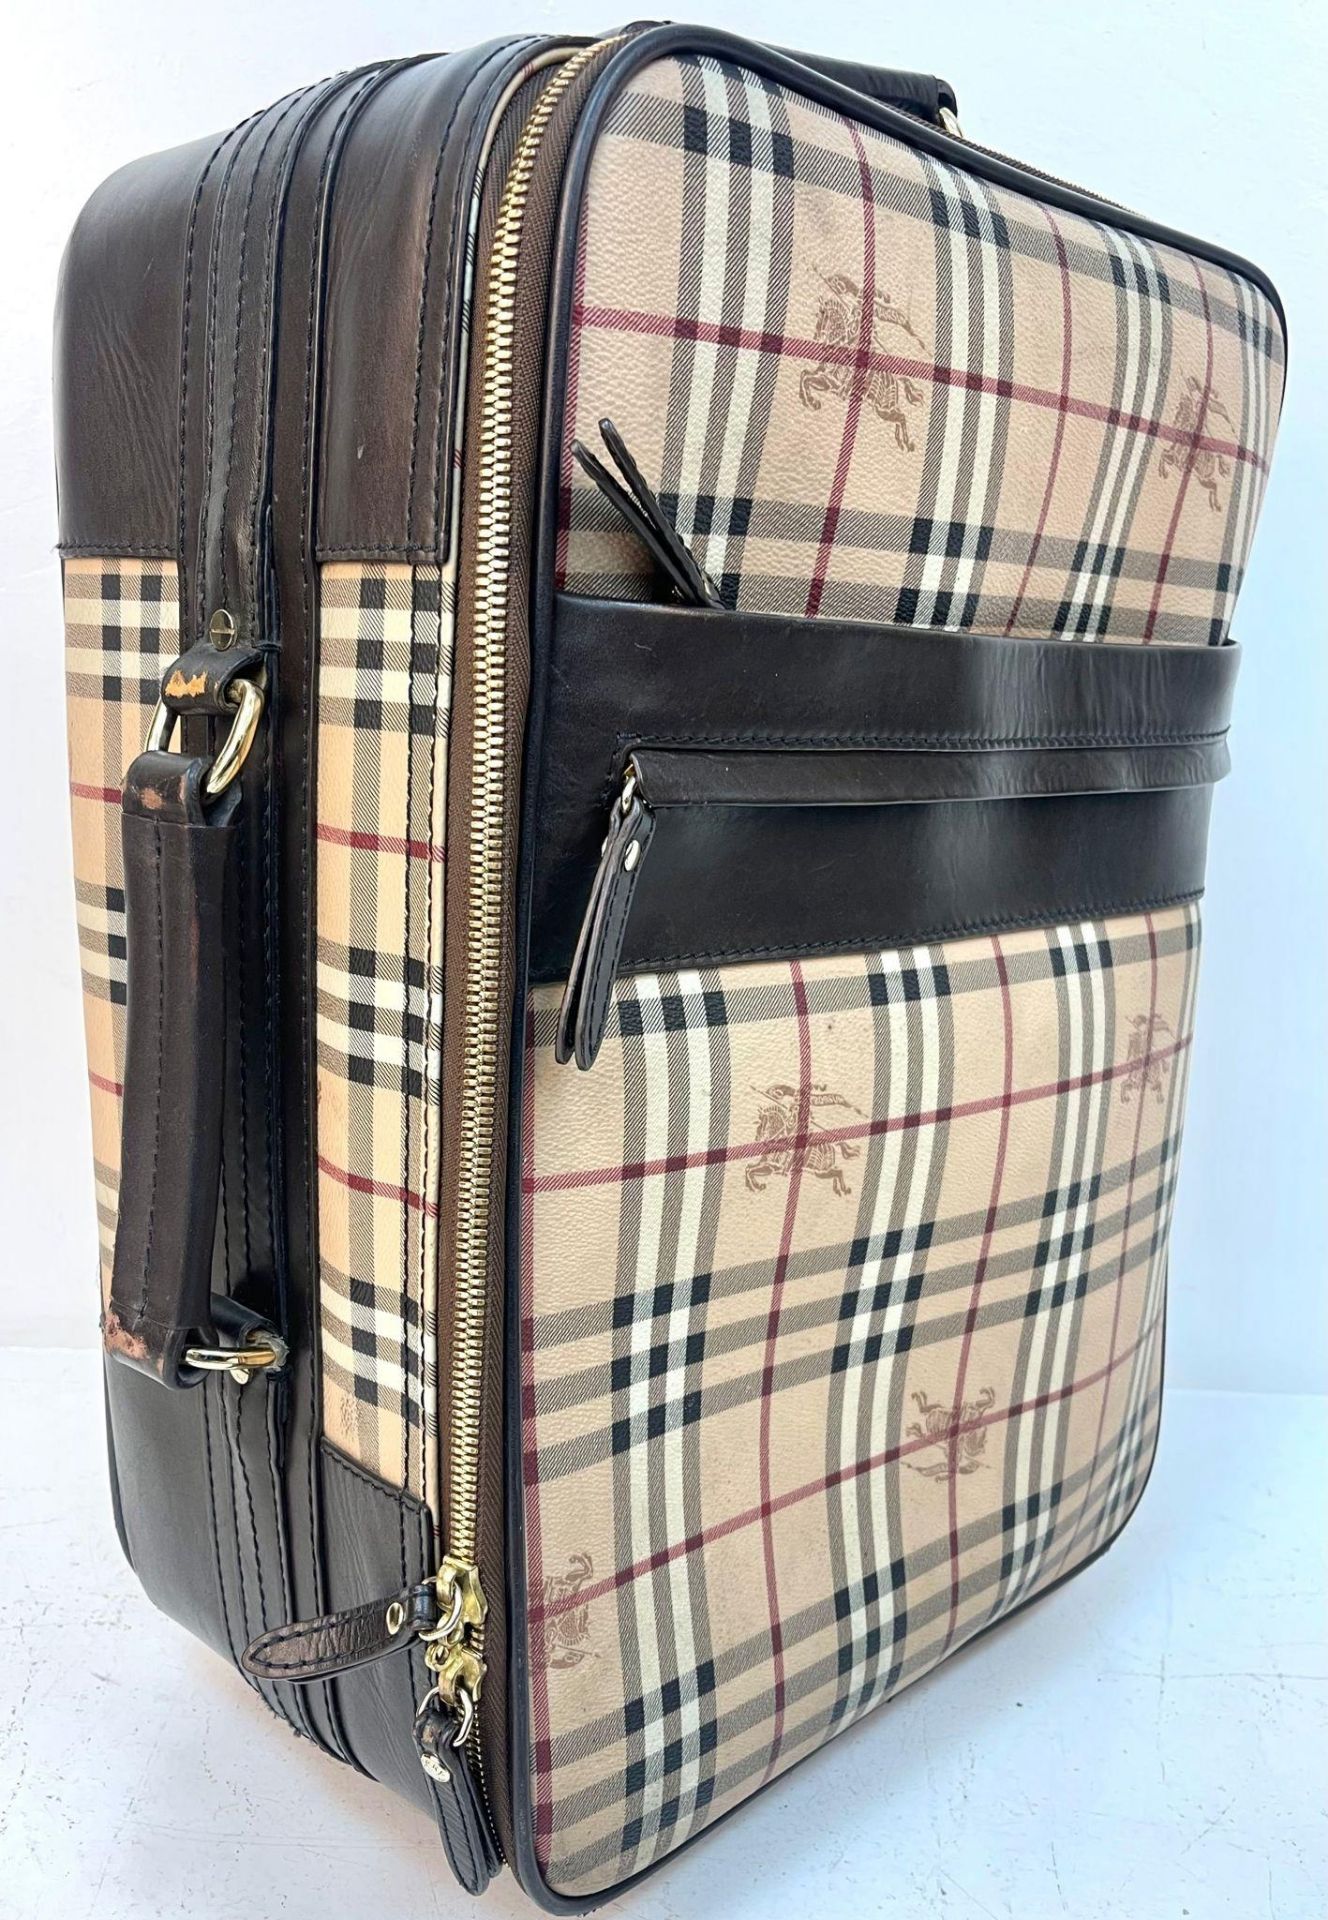 A BURBERRY "CARRY ON" SUITCASE WITH CLASSIC BURBERRY LIVERY. 36 X 52cms - Image 3 of 5